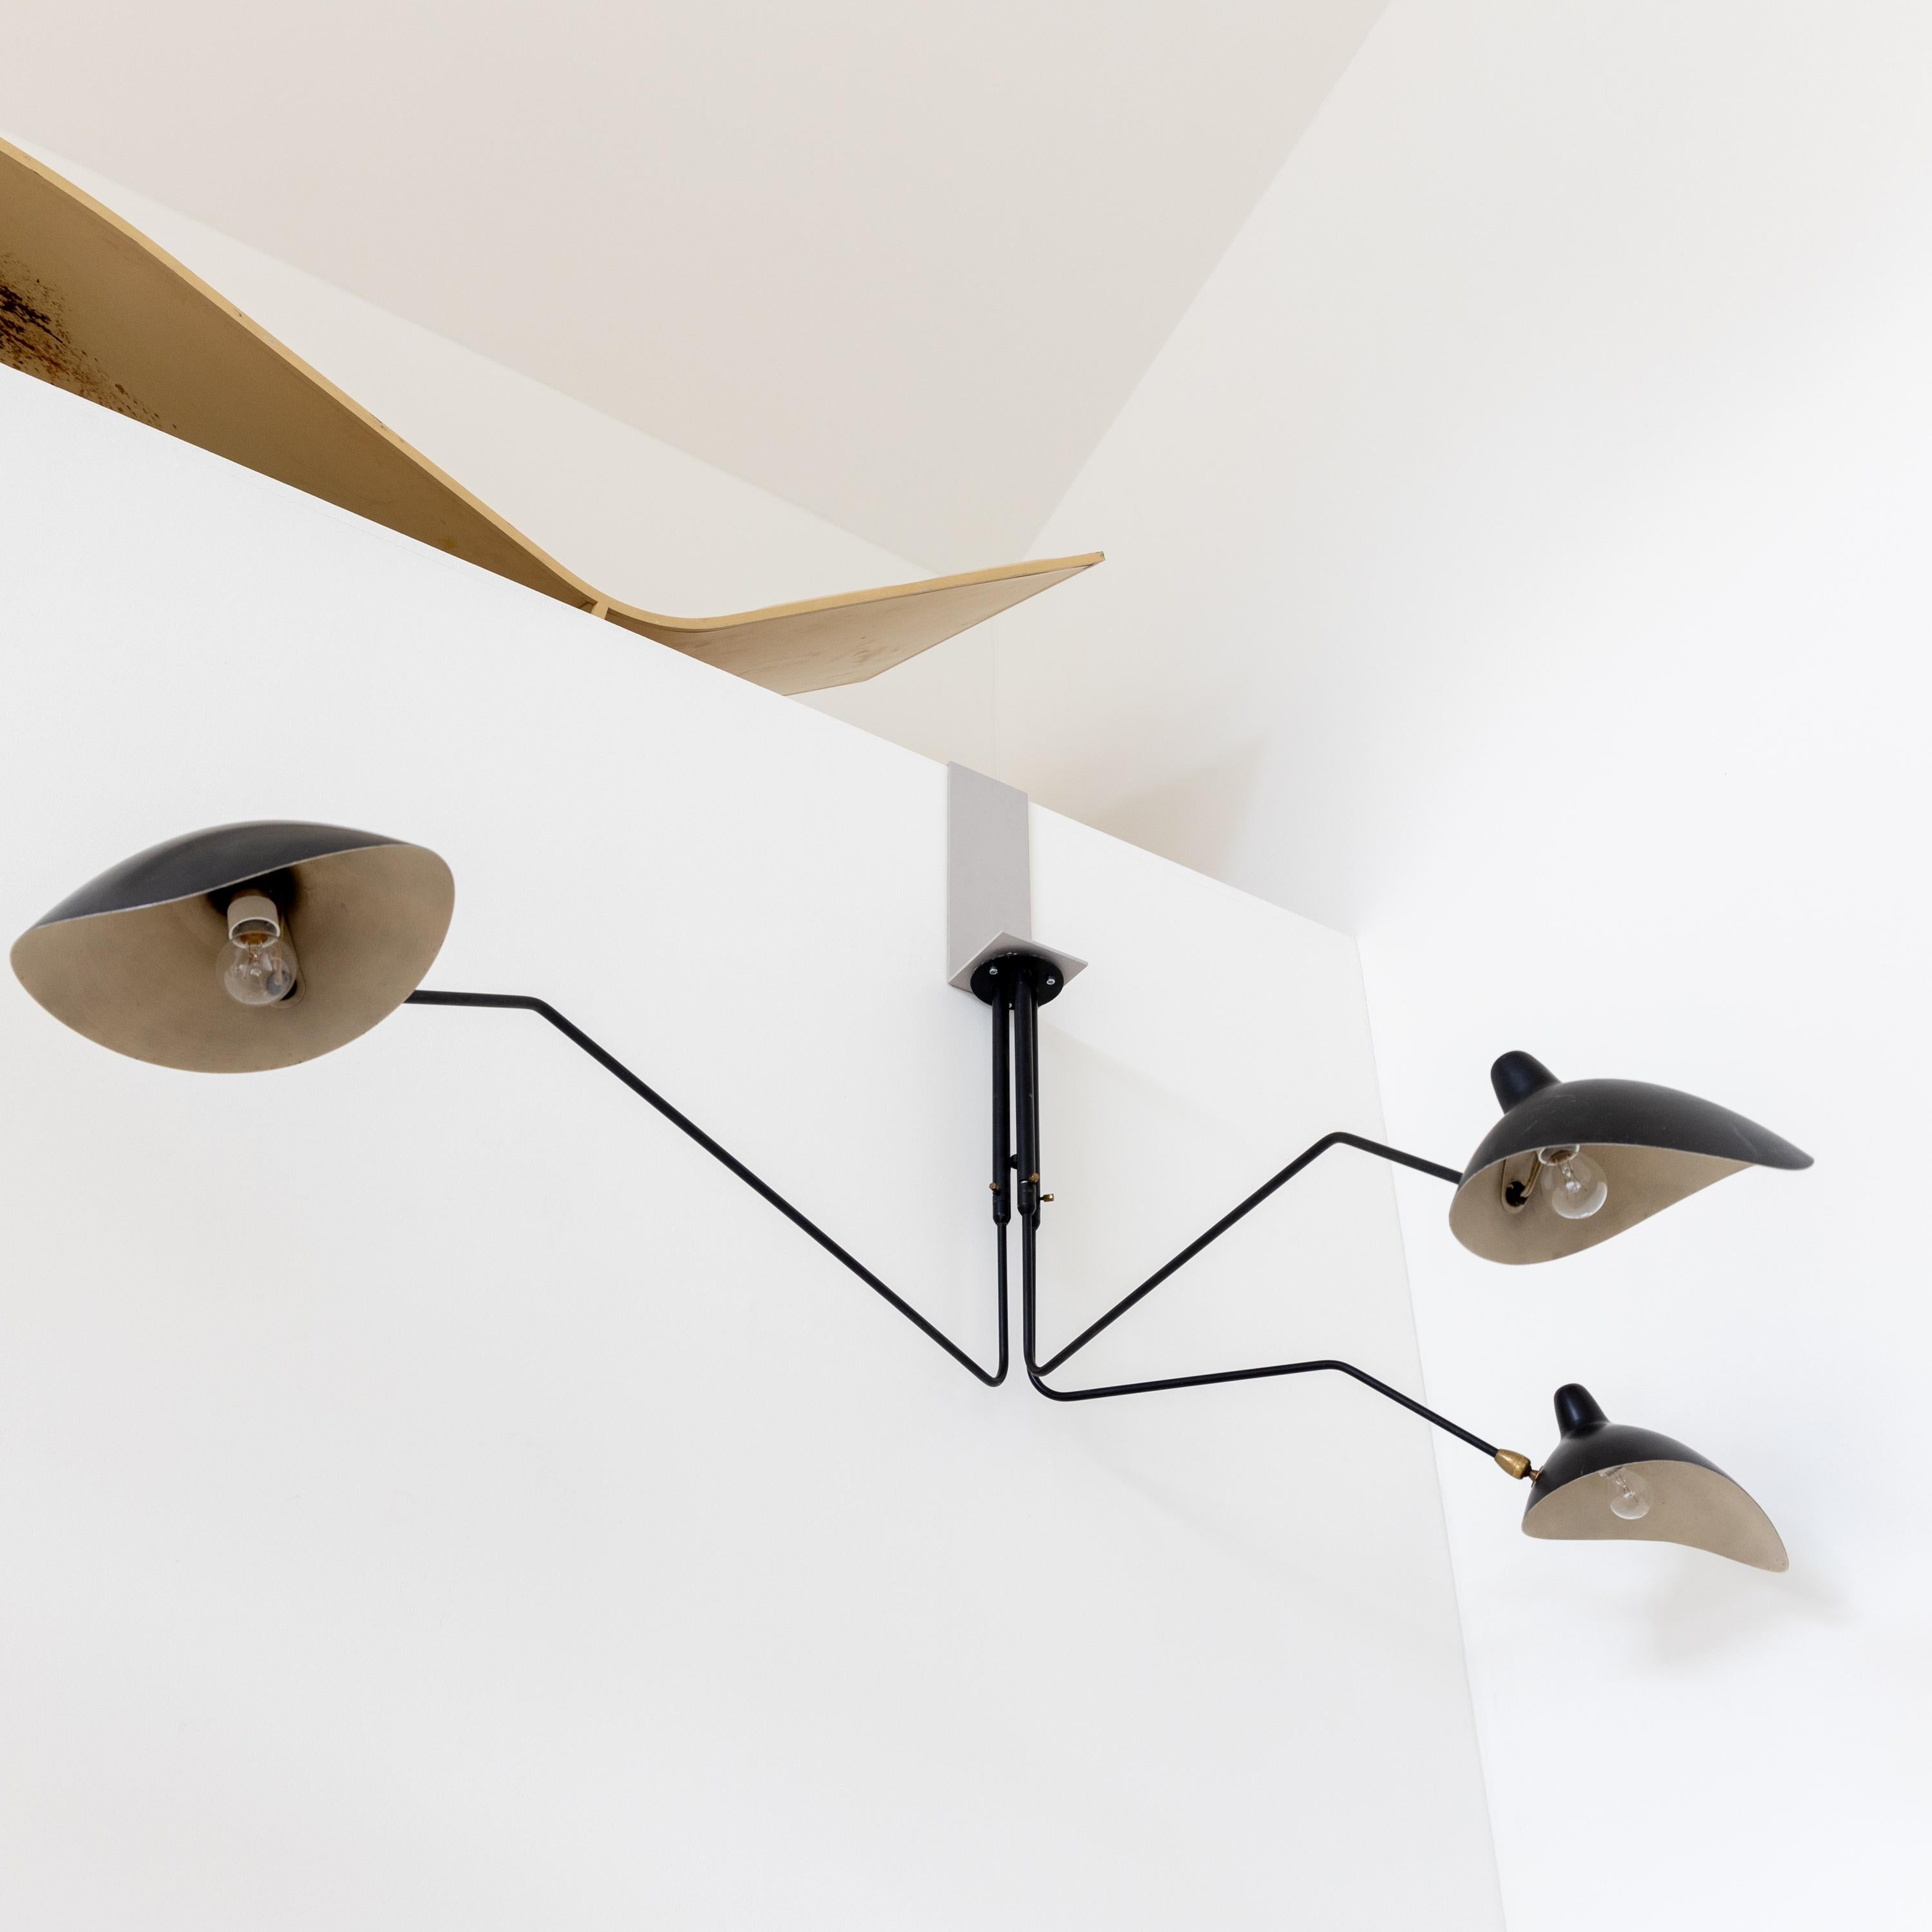 Mid-20th Century Serge Mouille, Ceiling Light with three Arms, France, 1958